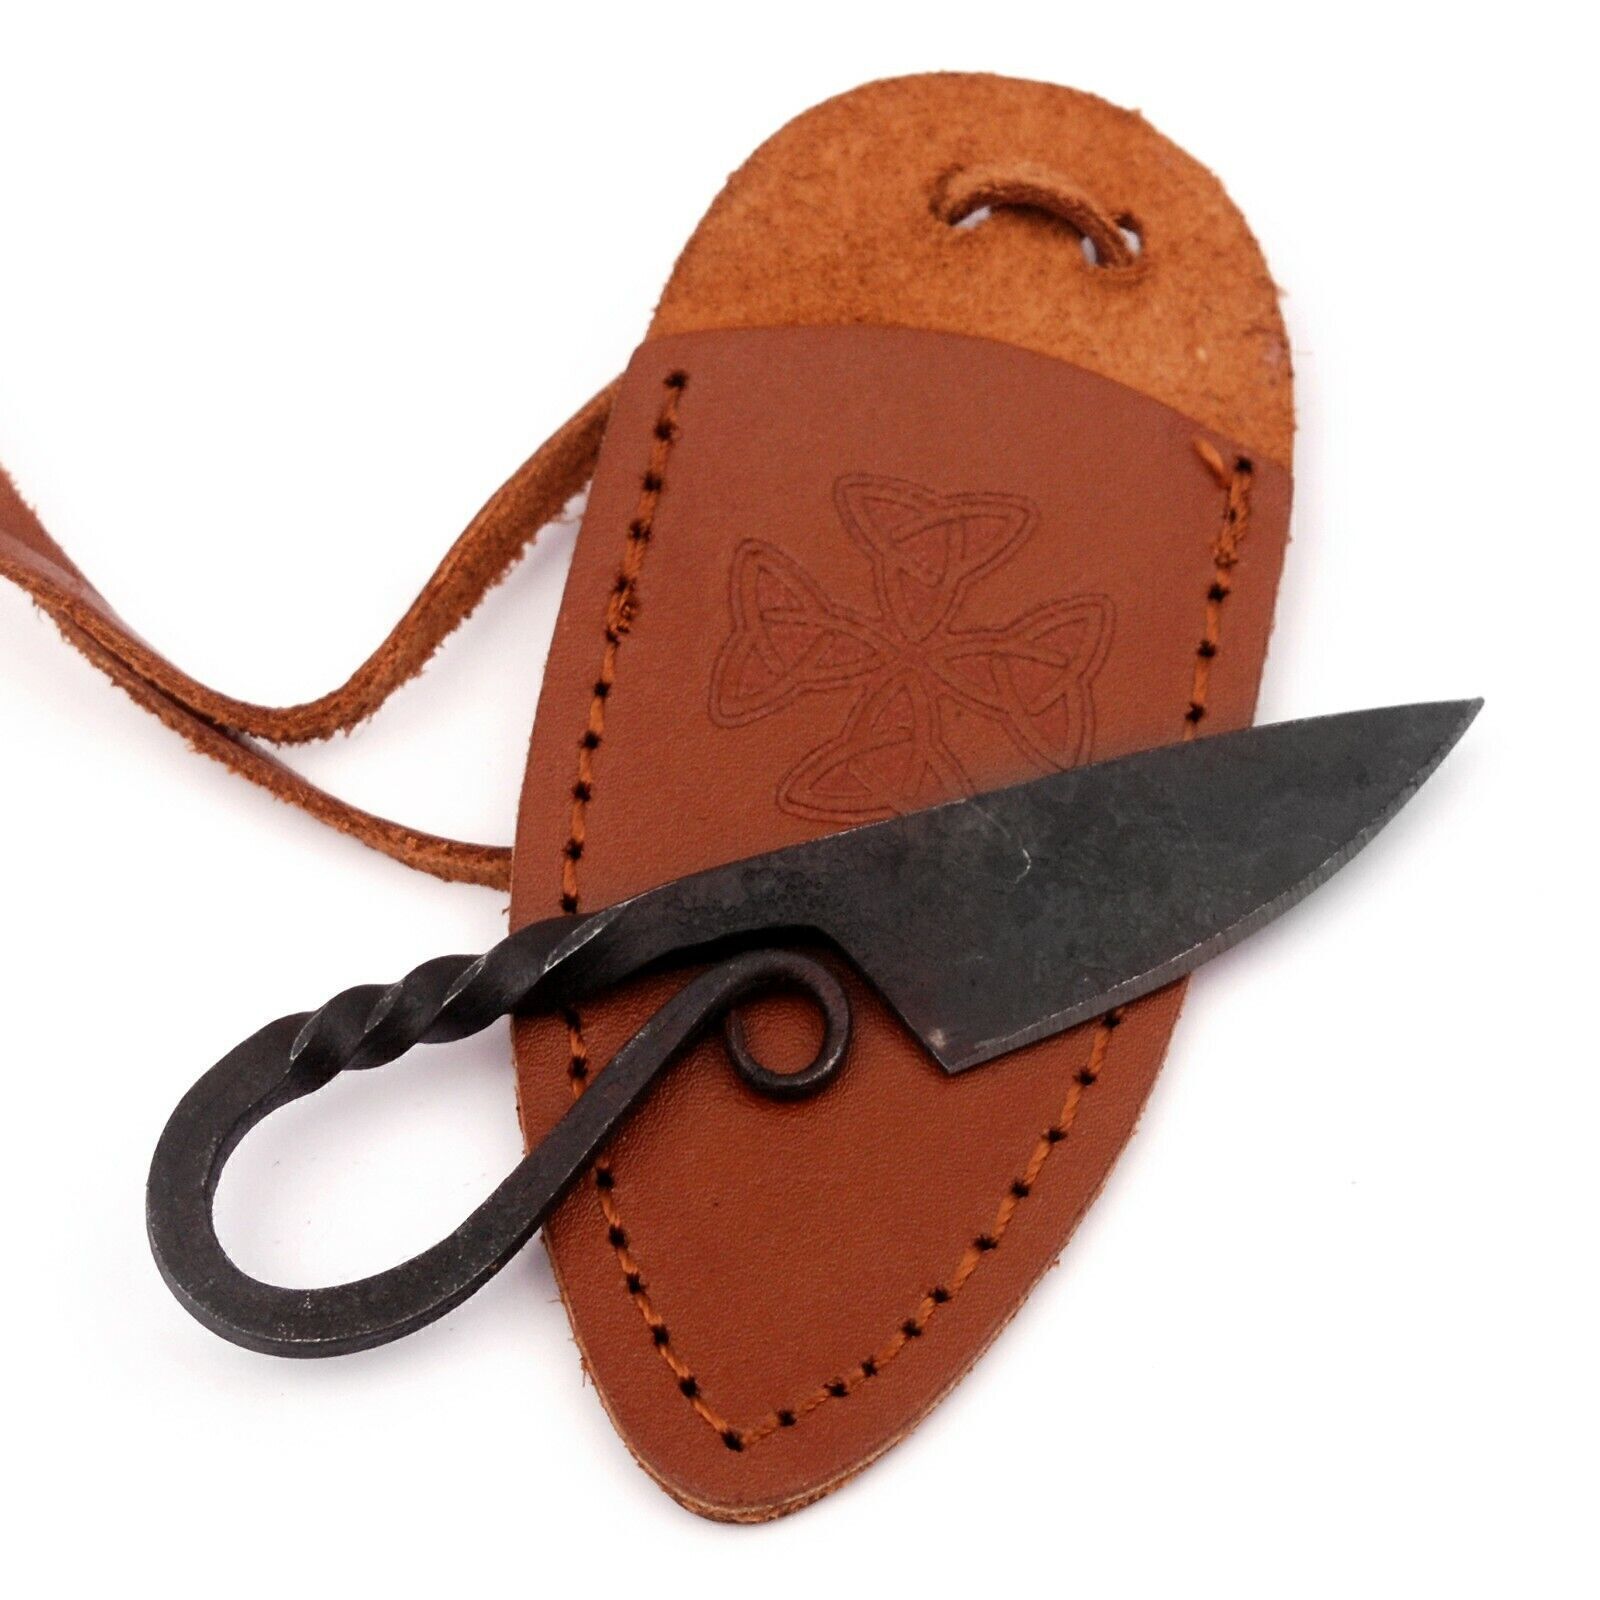 Handmade Twisted Miniature Hunting Pocket Neck Knife Necklace with Brown Sheath